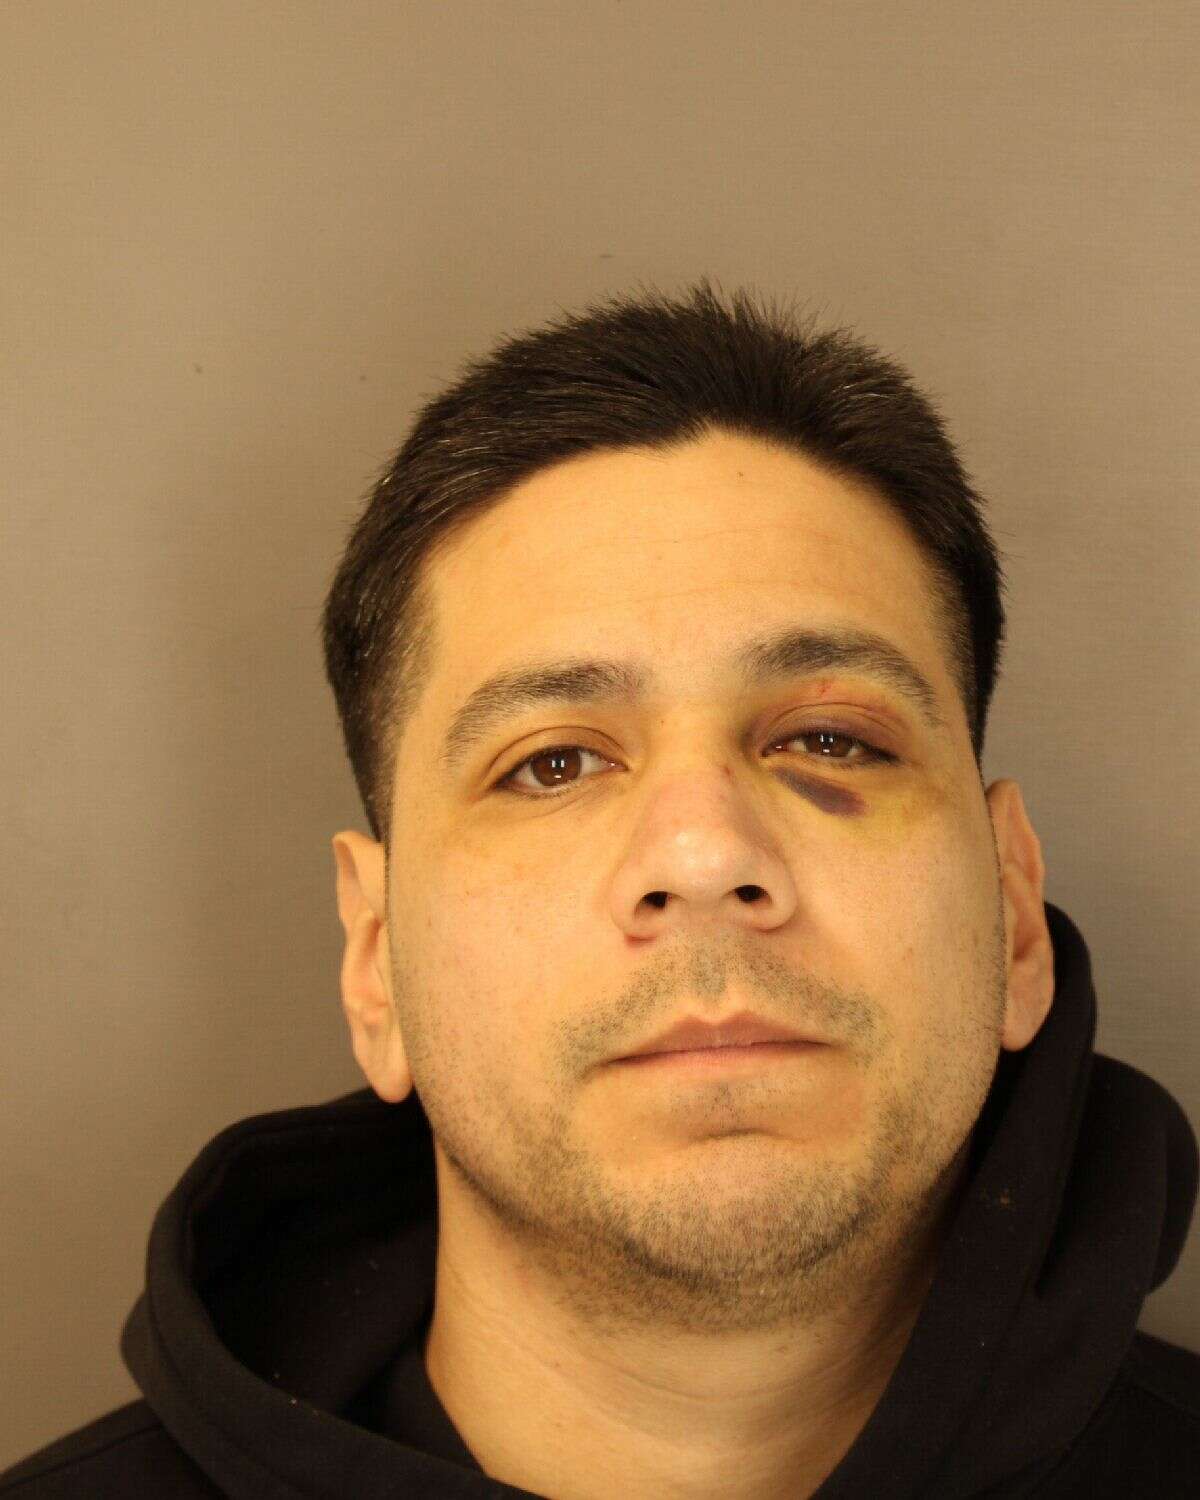 Adrian Simental of Moreau faces felonies for allegedly shooting a motorist in the abdomen in the parking lot of the Queensbury WalMart Sunday following what authorities say was a road rage incident. 